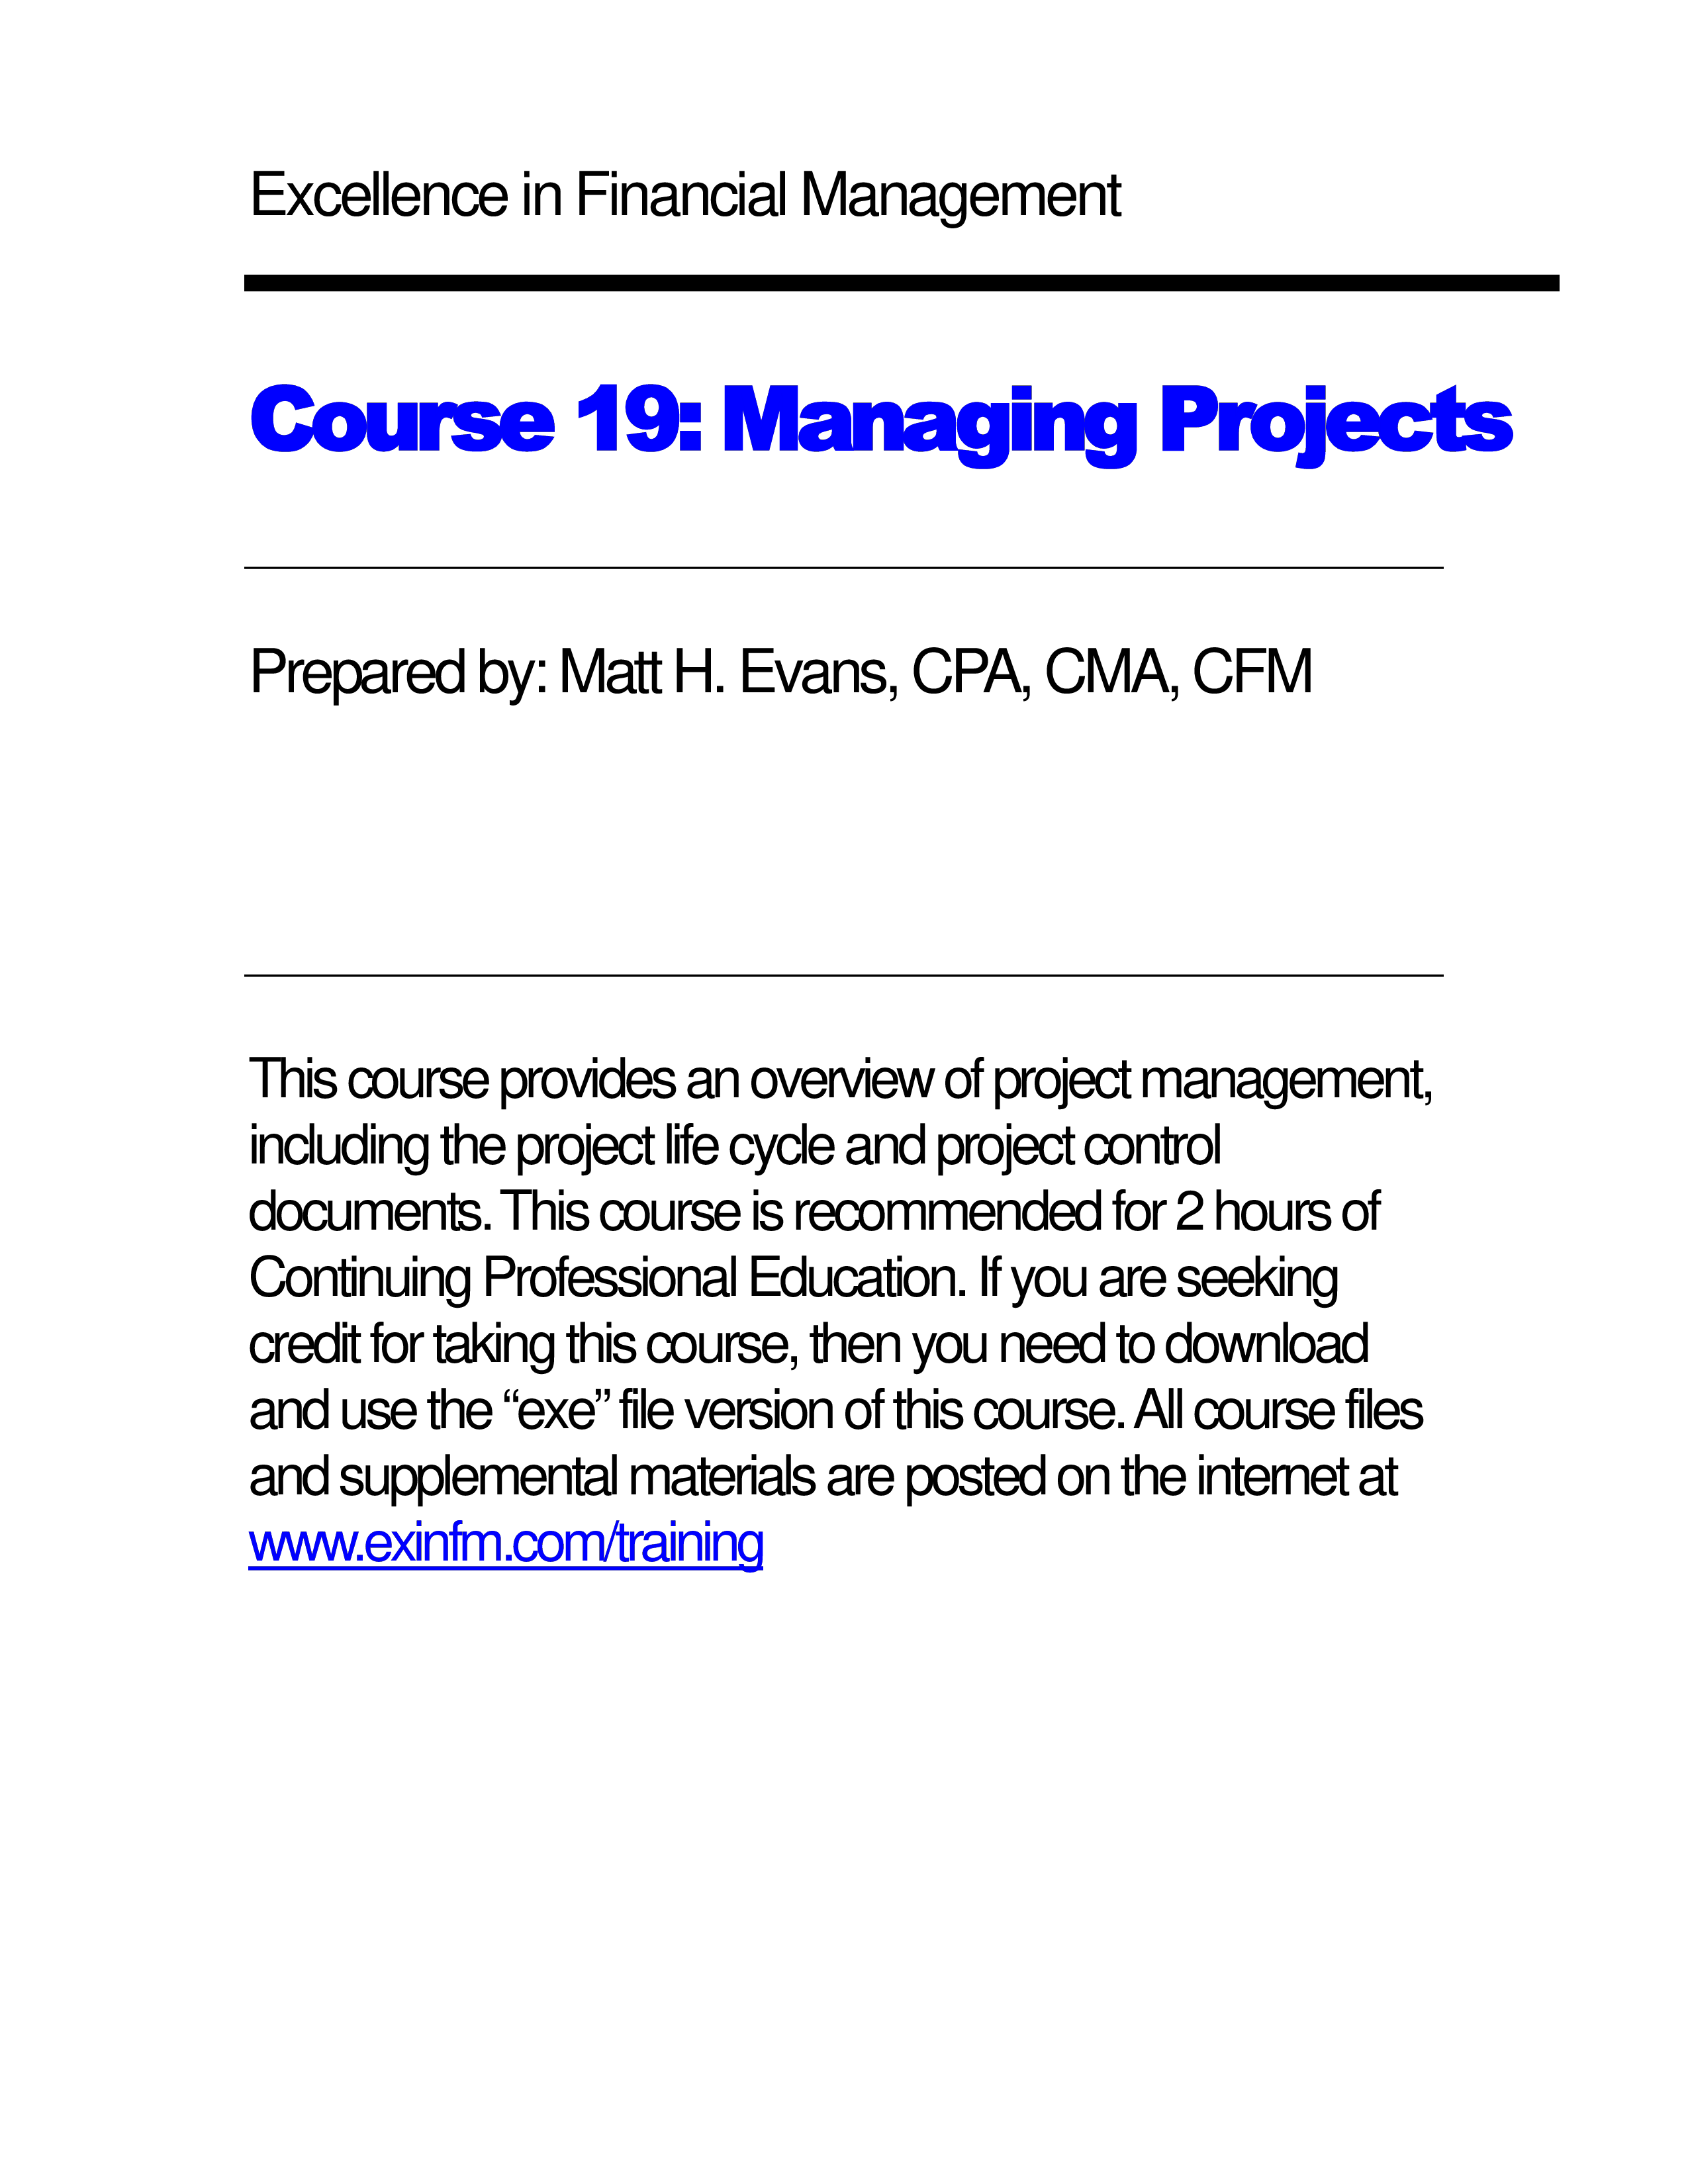 managing projects in financial management template